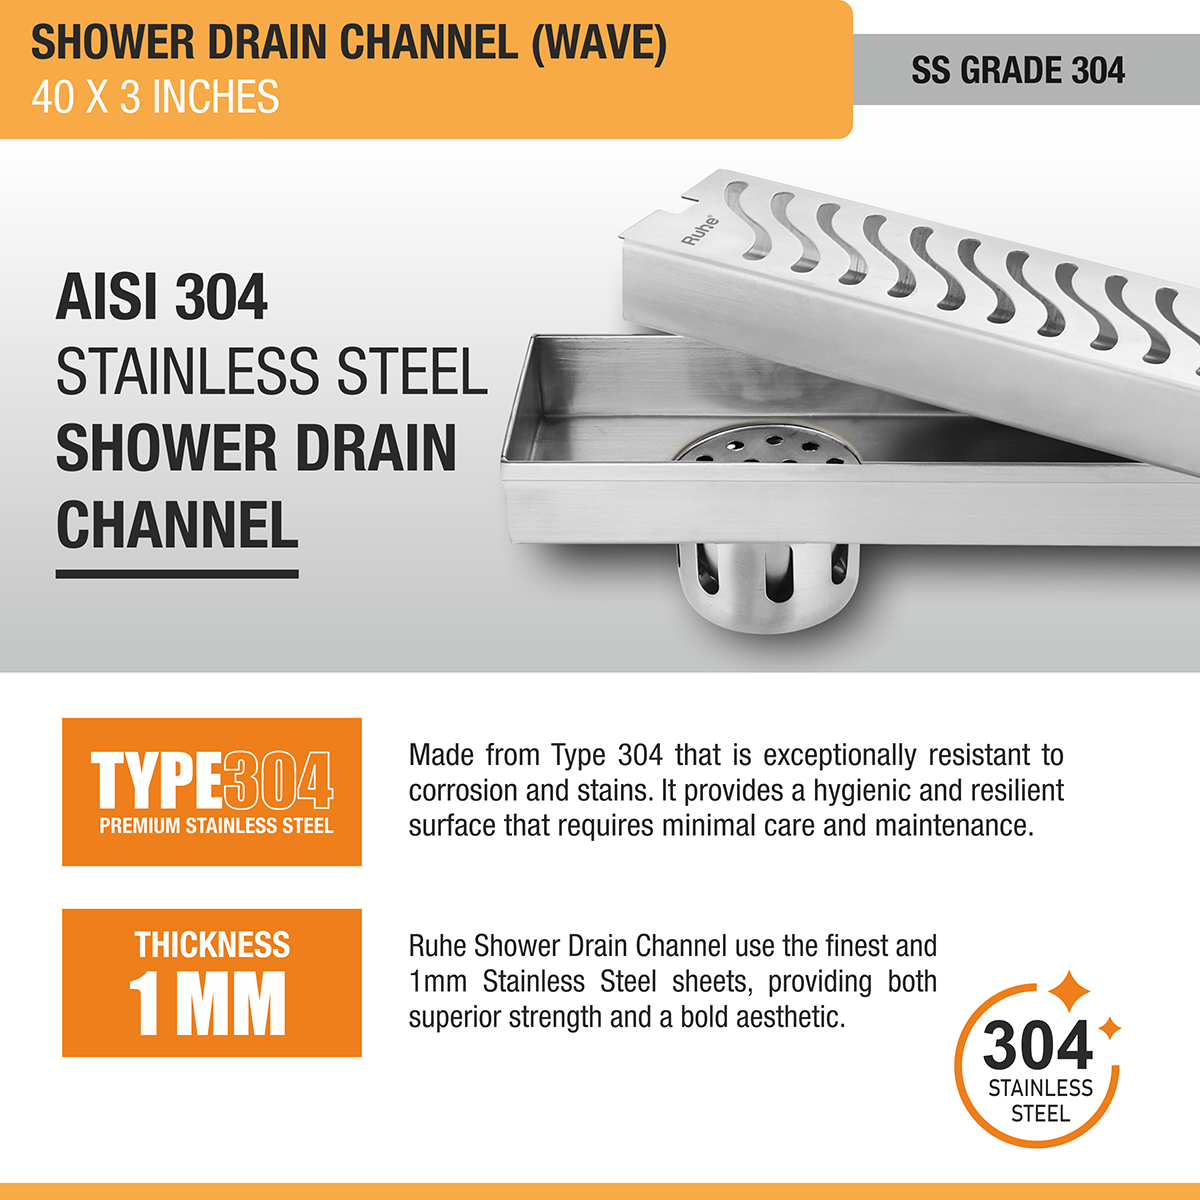 Wave Shower Drain Channel (40 X 3 Inches) with Cockroach Trap (304 Grade) stainless steel